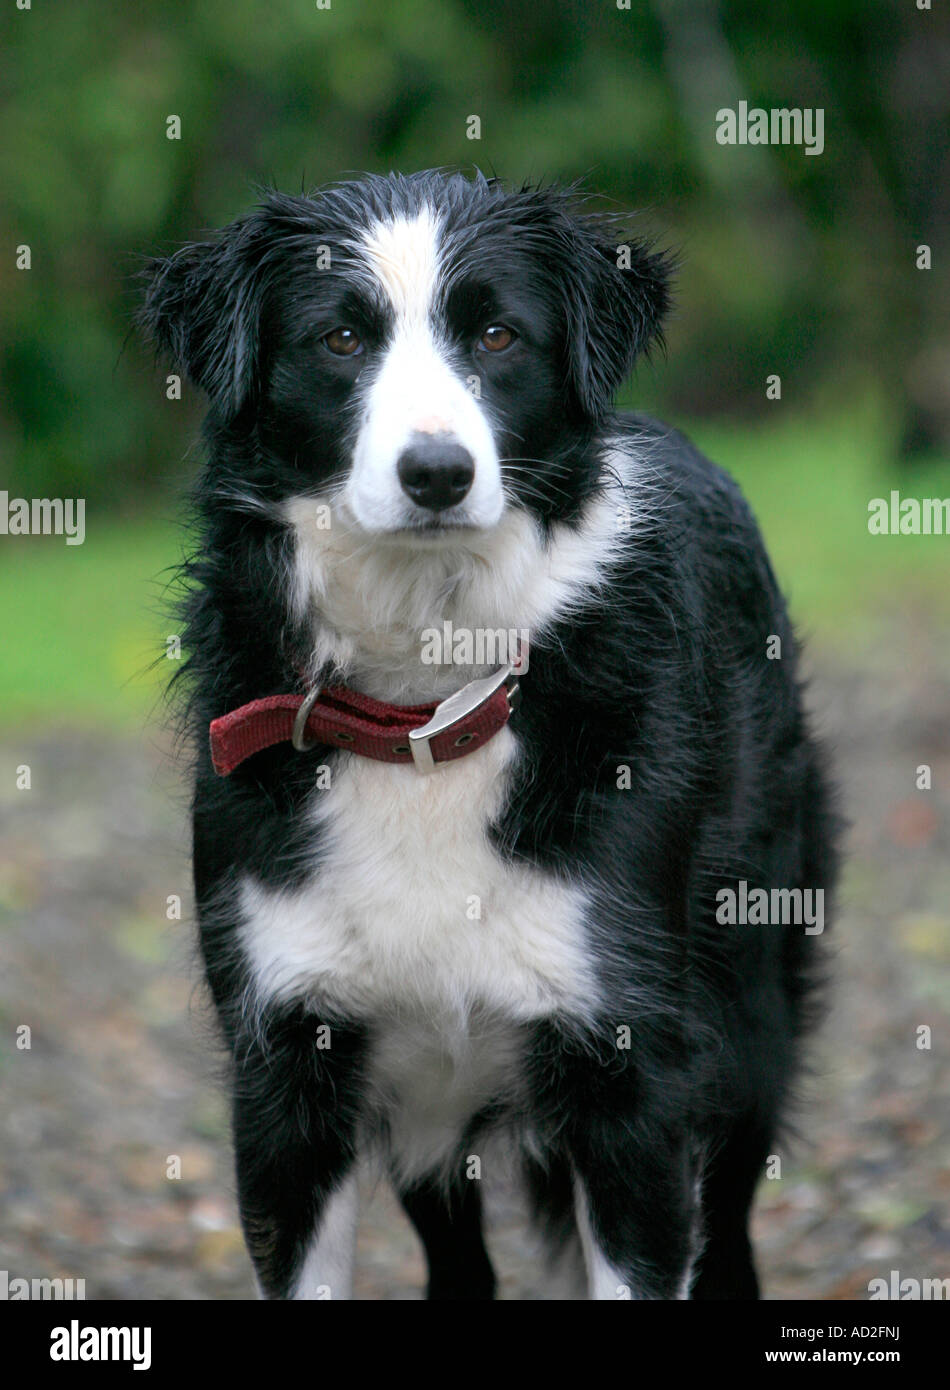 A beautiful soulful black and white border collie dog Stock Photo